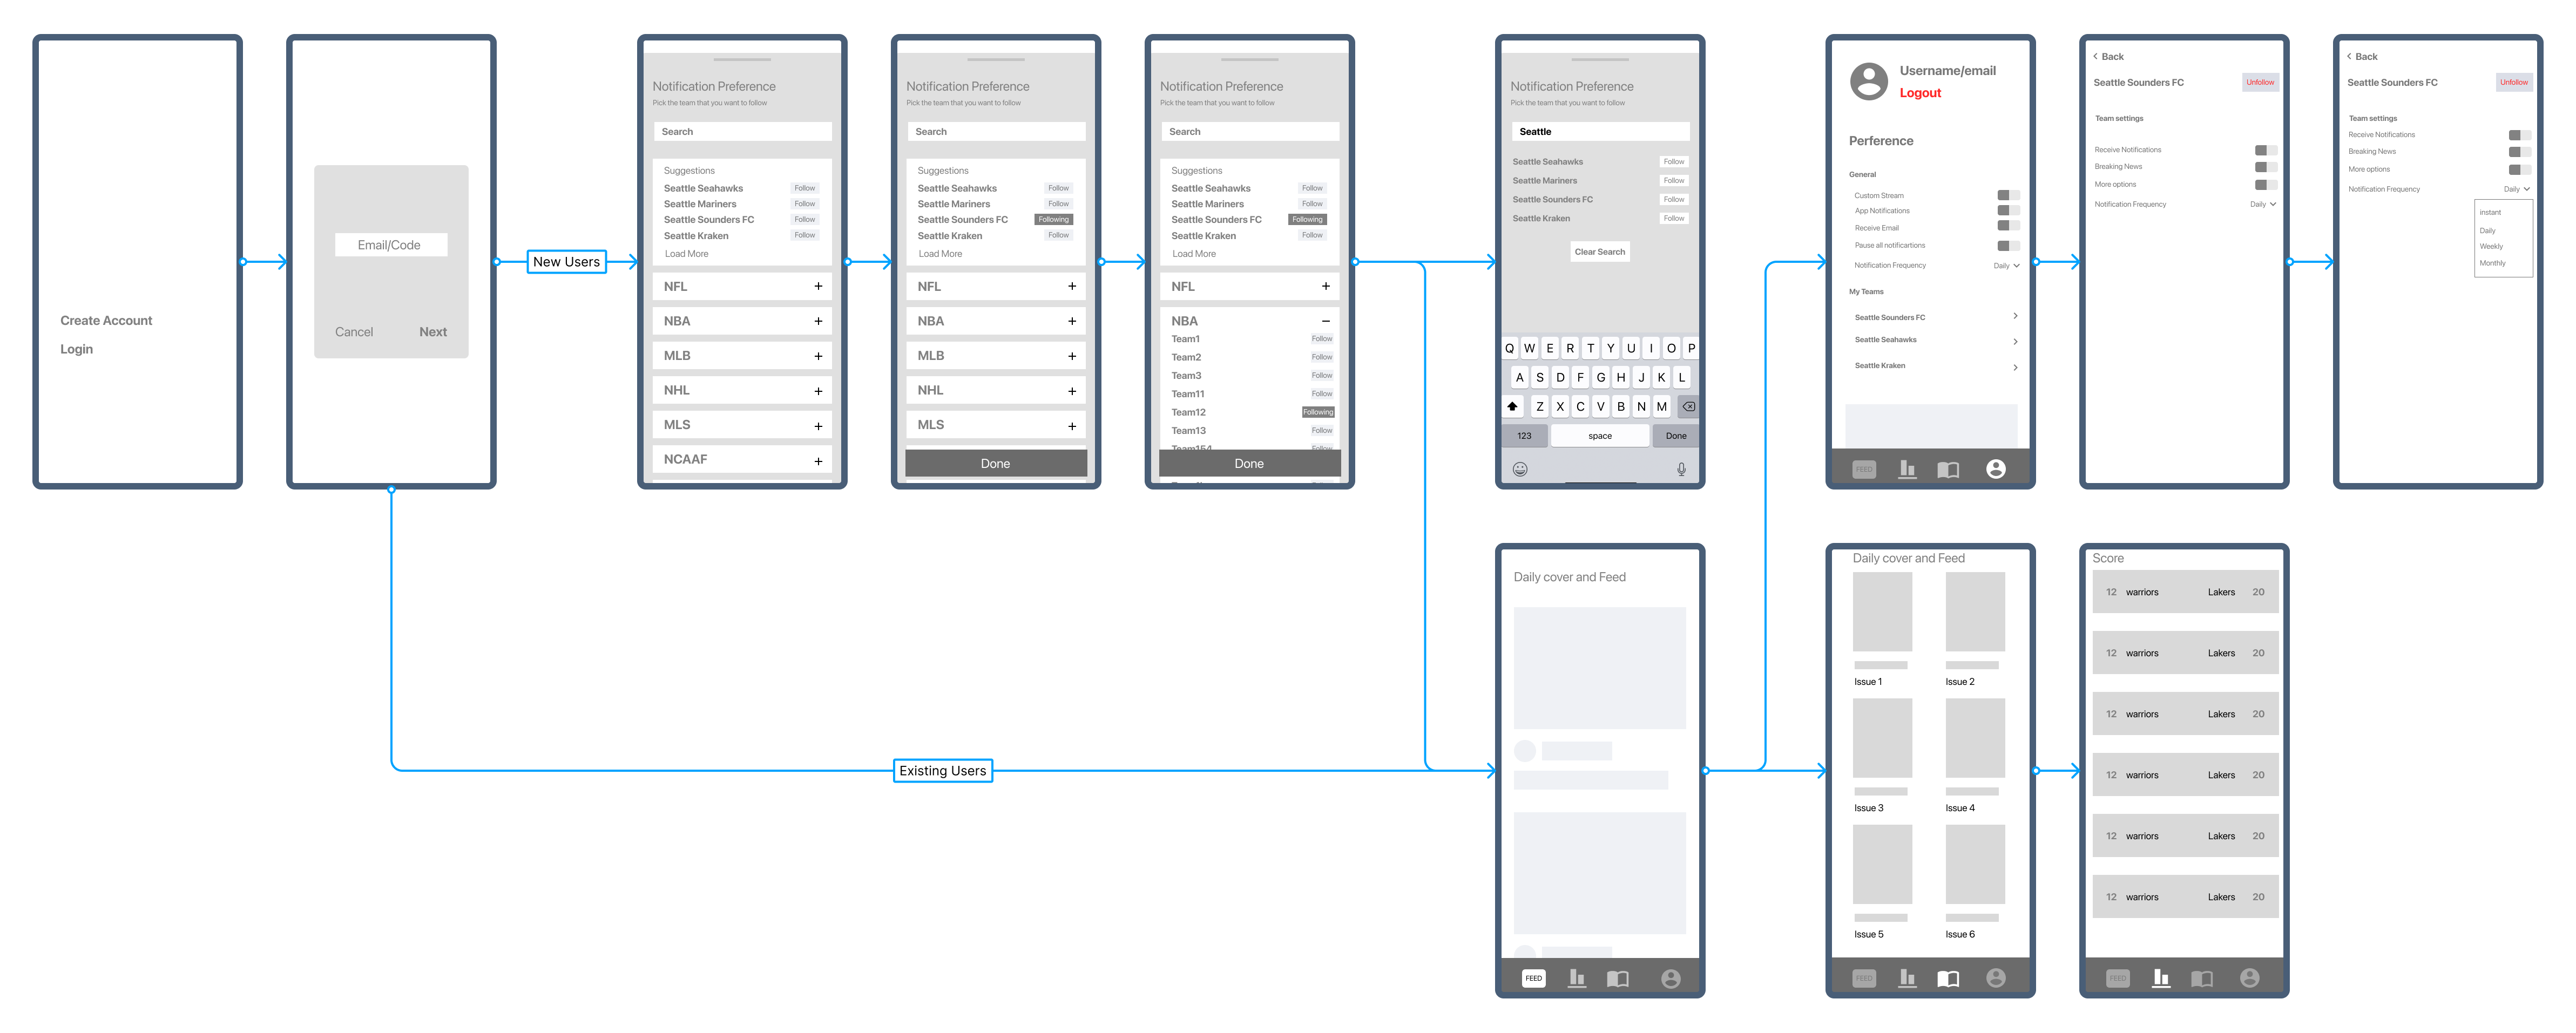 Low-fi onboarding and major page wireframes: Ideation & Exploration - showcase image